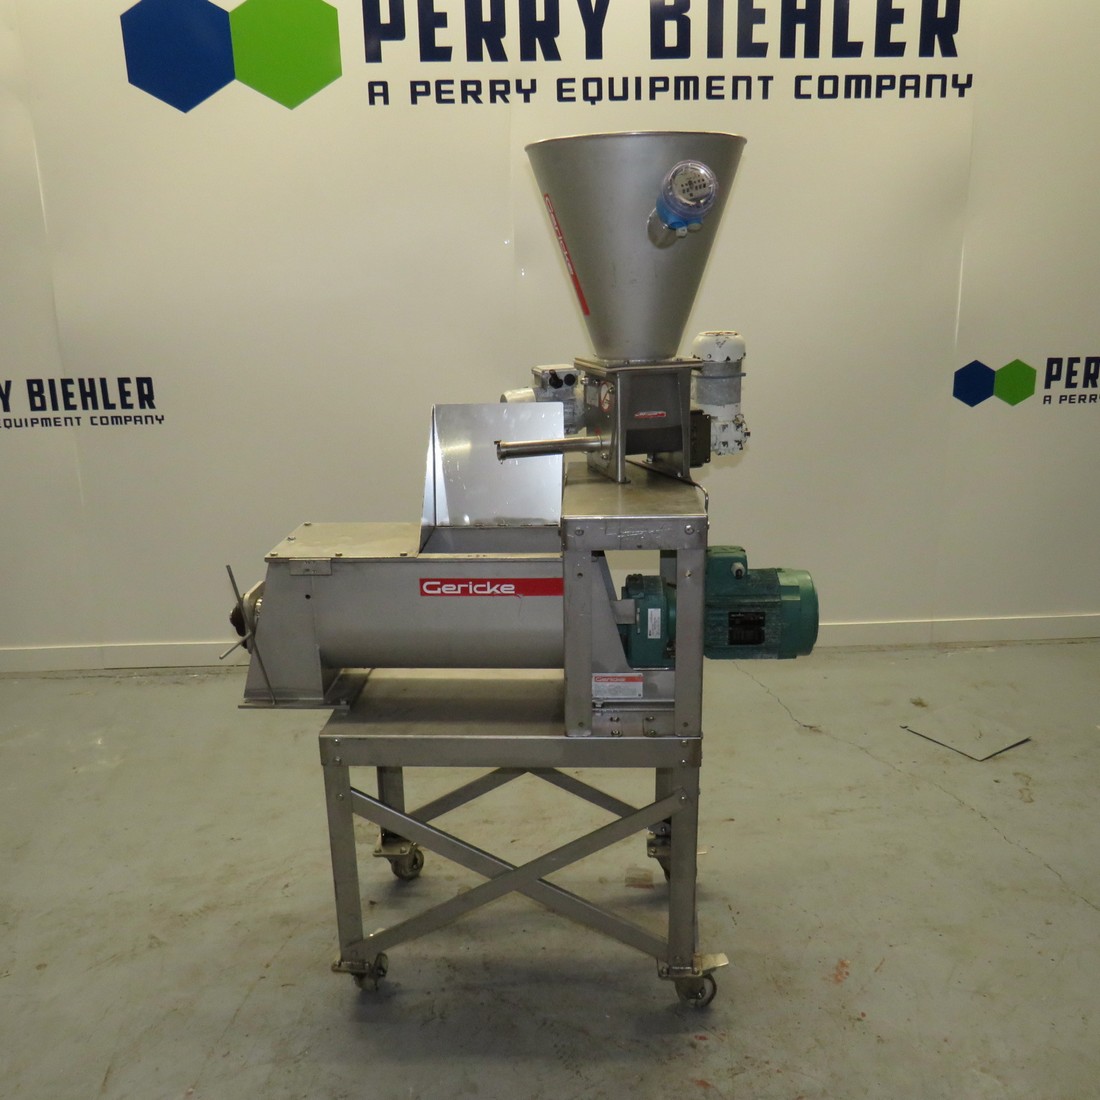 Gericke Stainless Steel Continuous Mixer Type GCM500